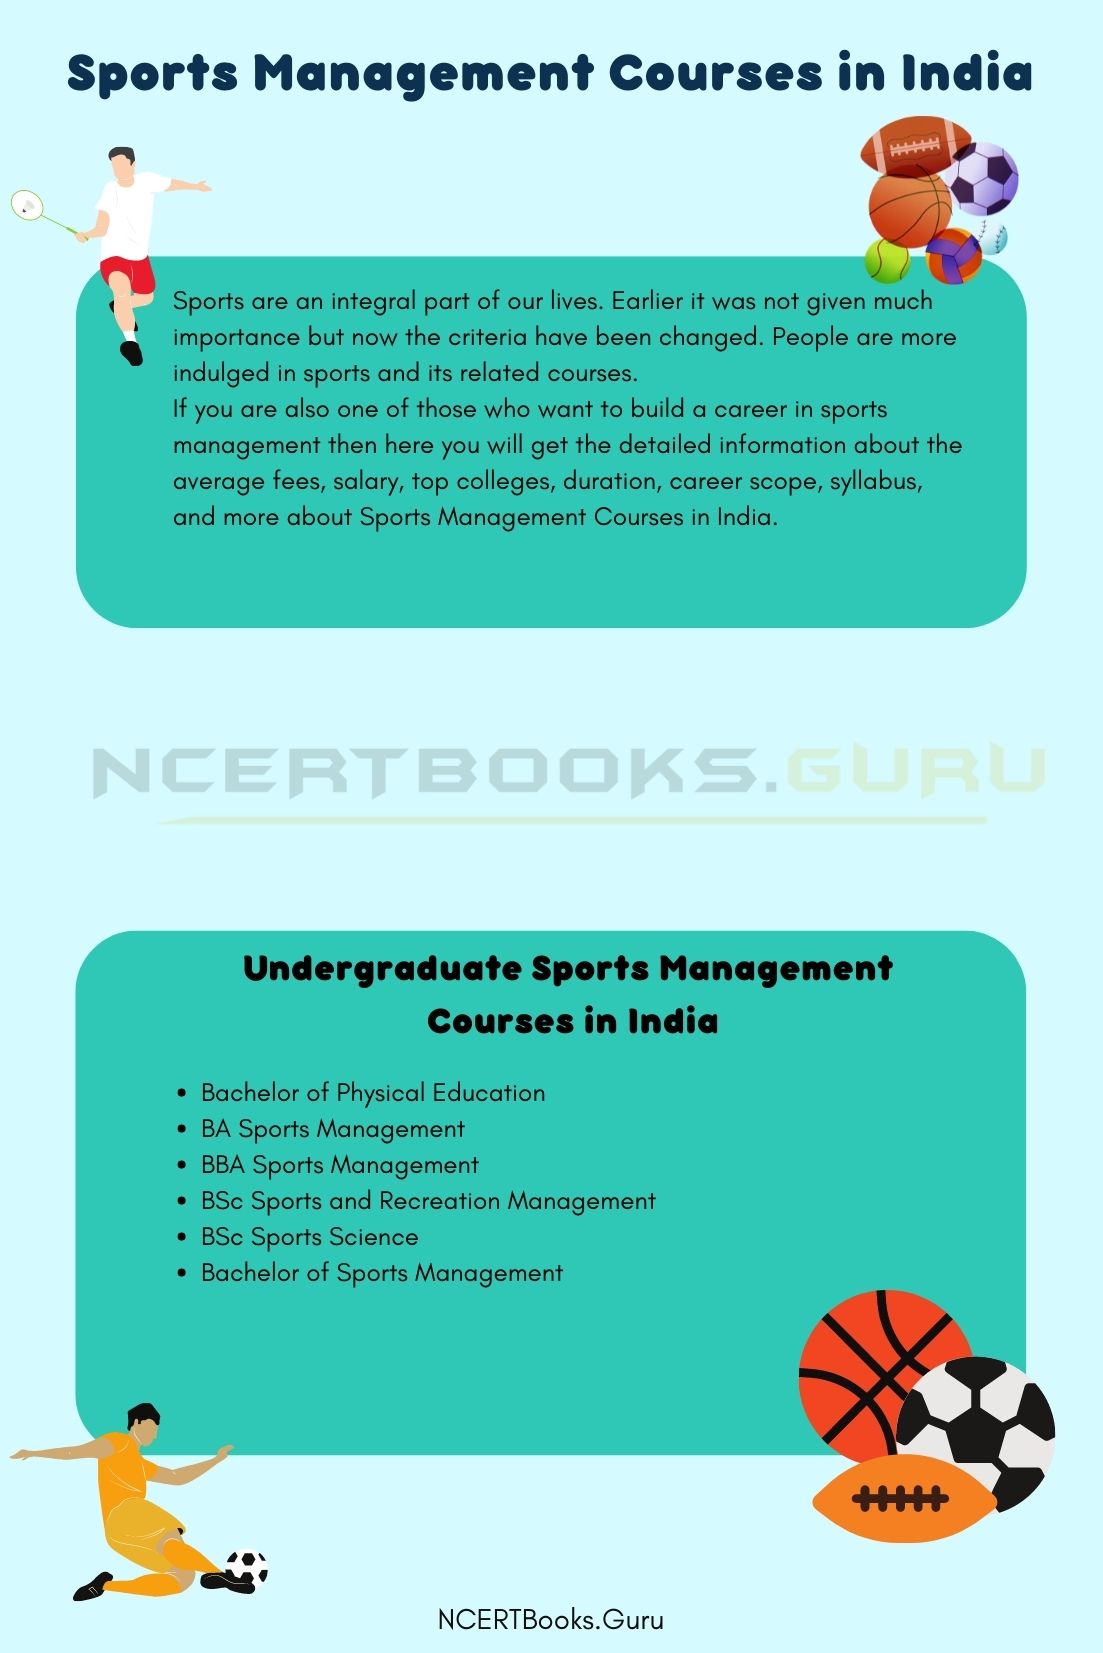 Sports Management Courses in India 2